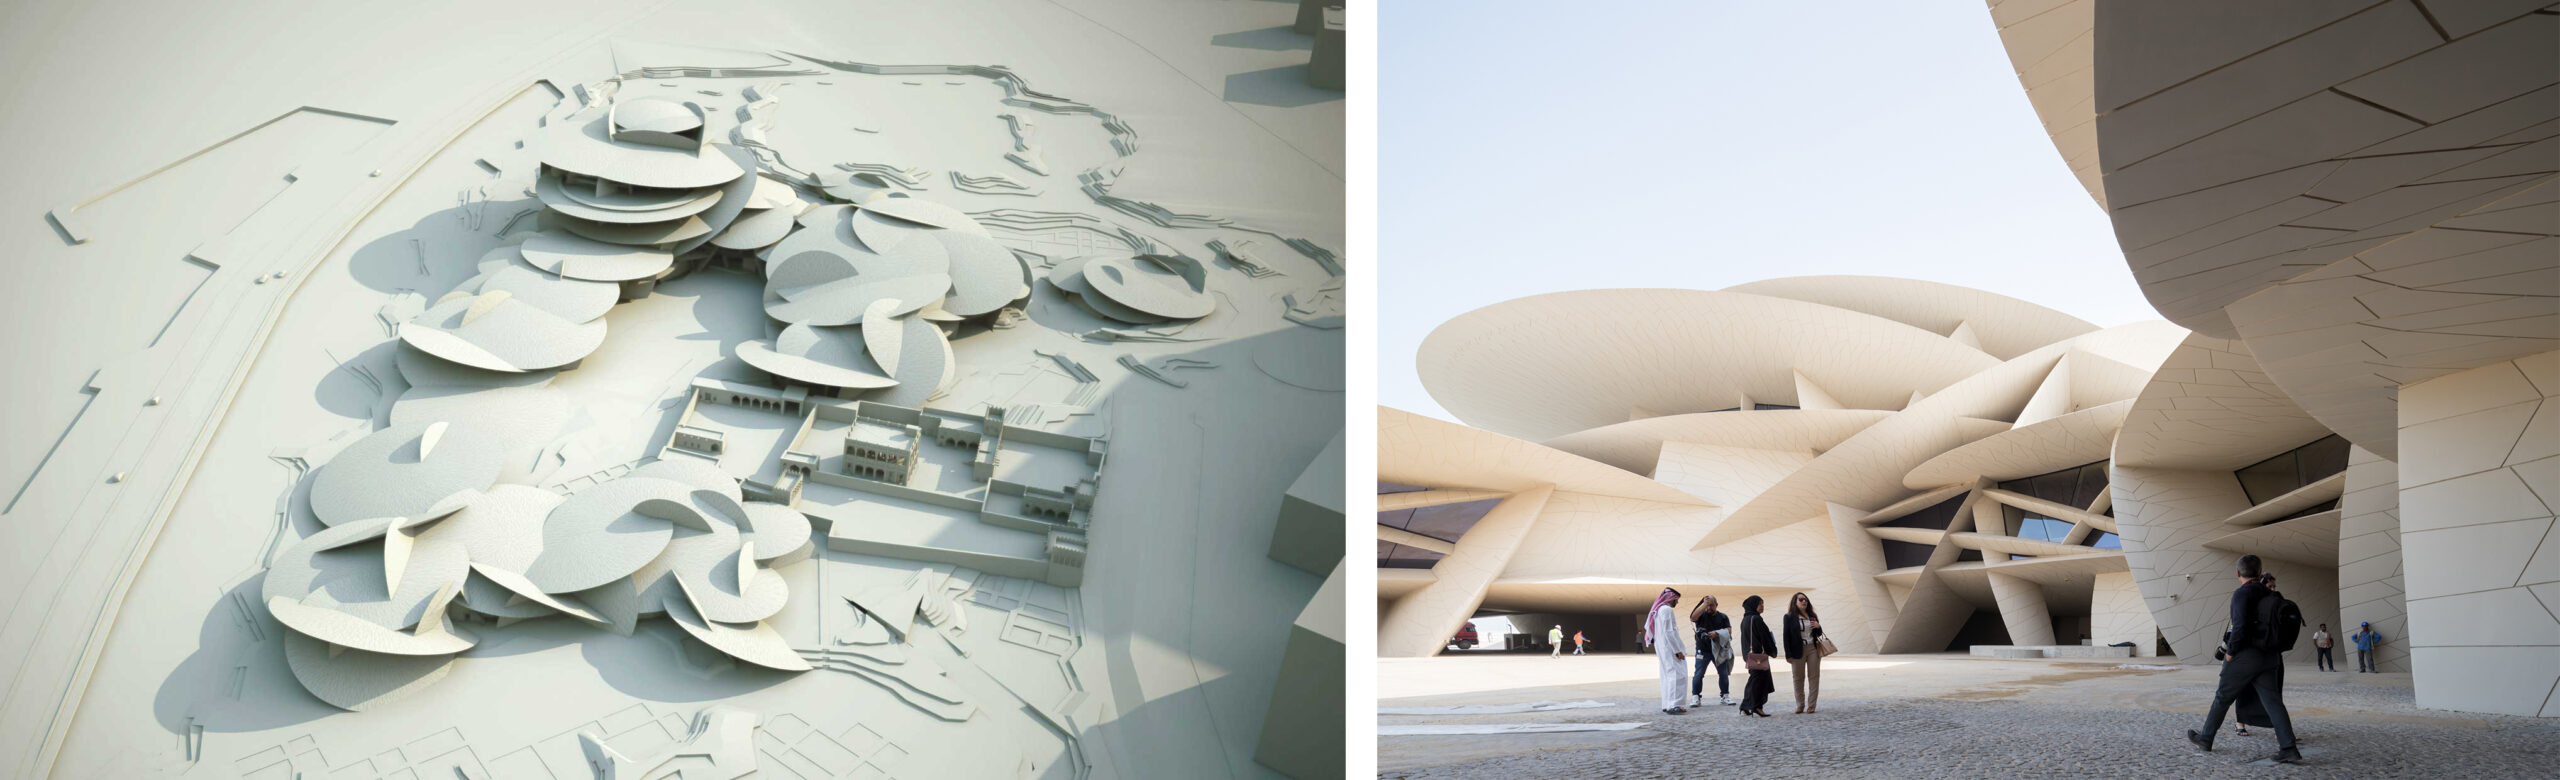 National Museum of Qatar in Doha, Designed by Ateliers Jean Nouvel. Photos by Iwan Baan.